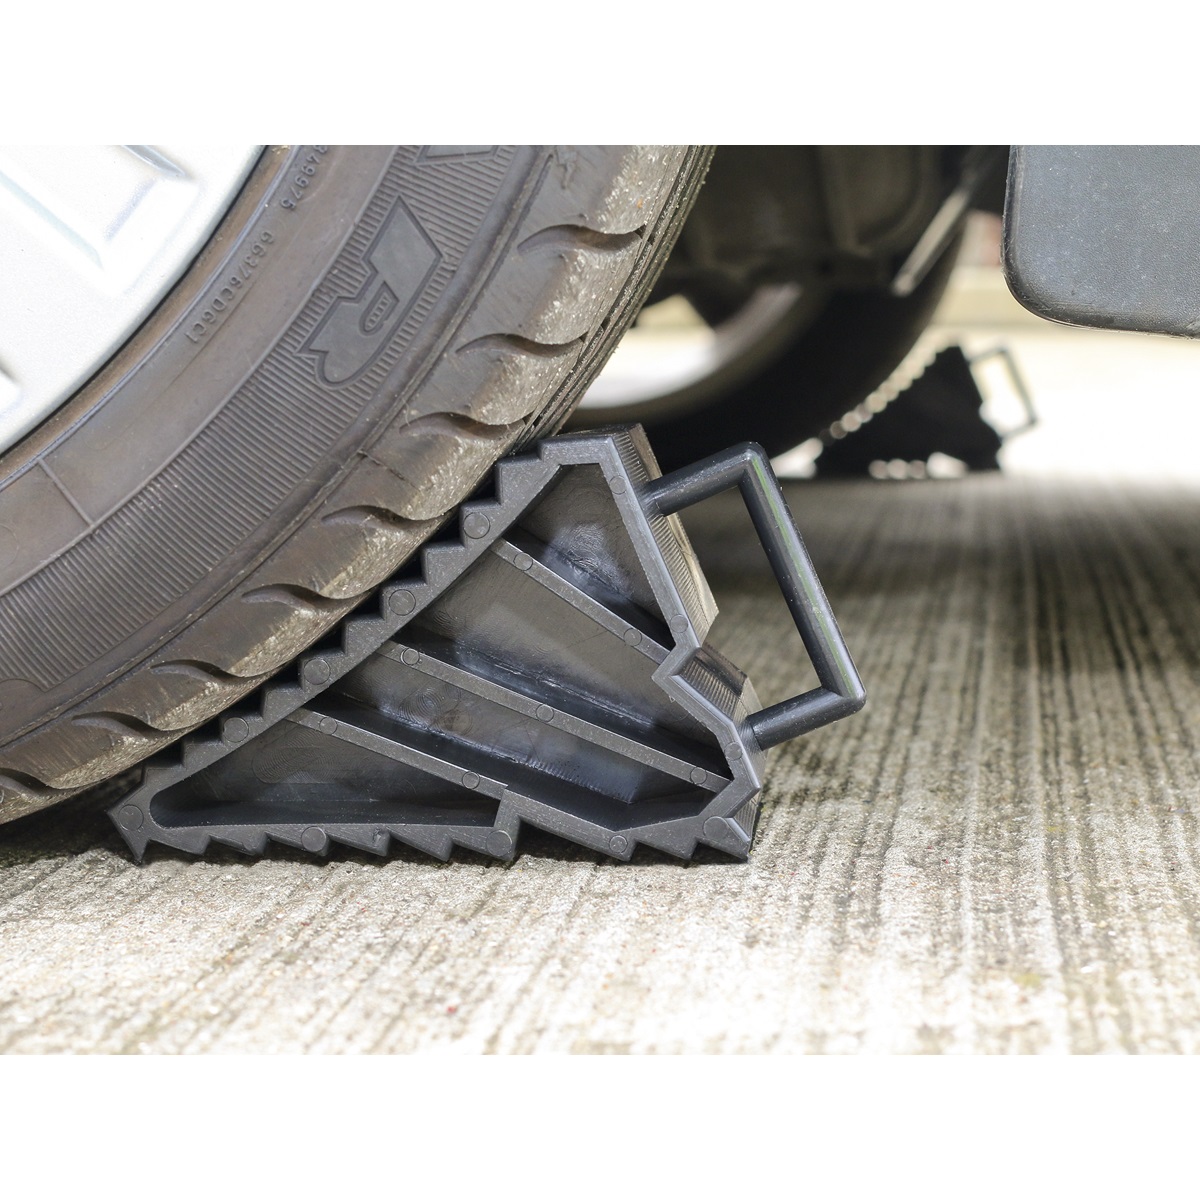 SEALEY 2X Composite Wheel Chocks WC09 | Two composite wheel chocks with rubberised grip bases. | toolforce.ie